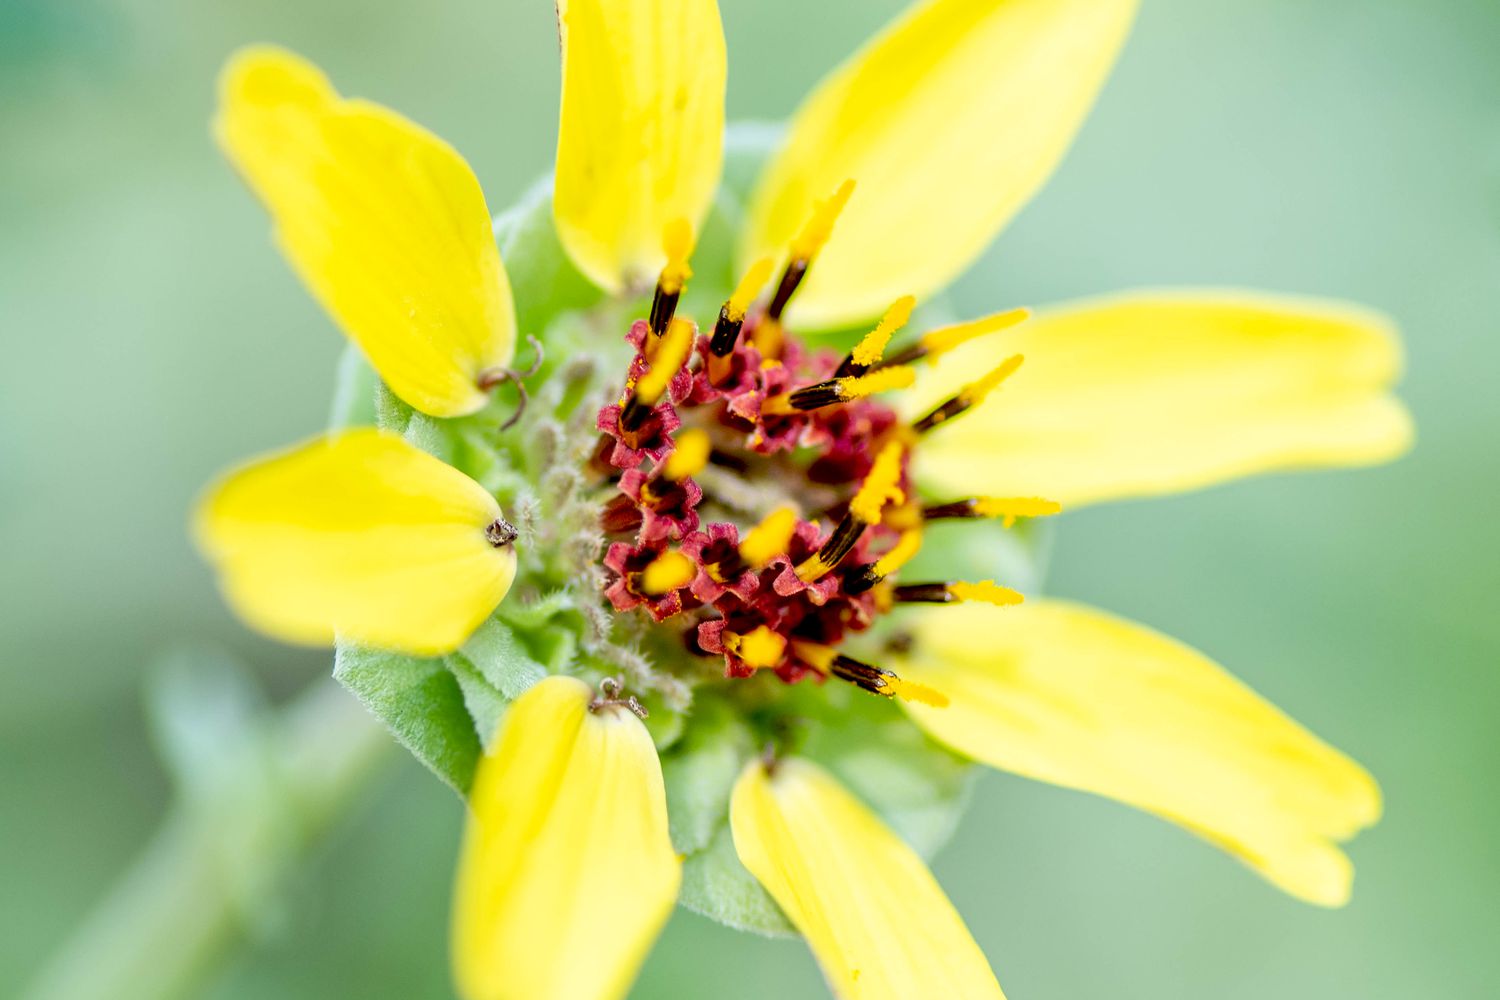 Chocolate daisy with radiating yellow petals and tiny burgundy pollen filaments in center closeup